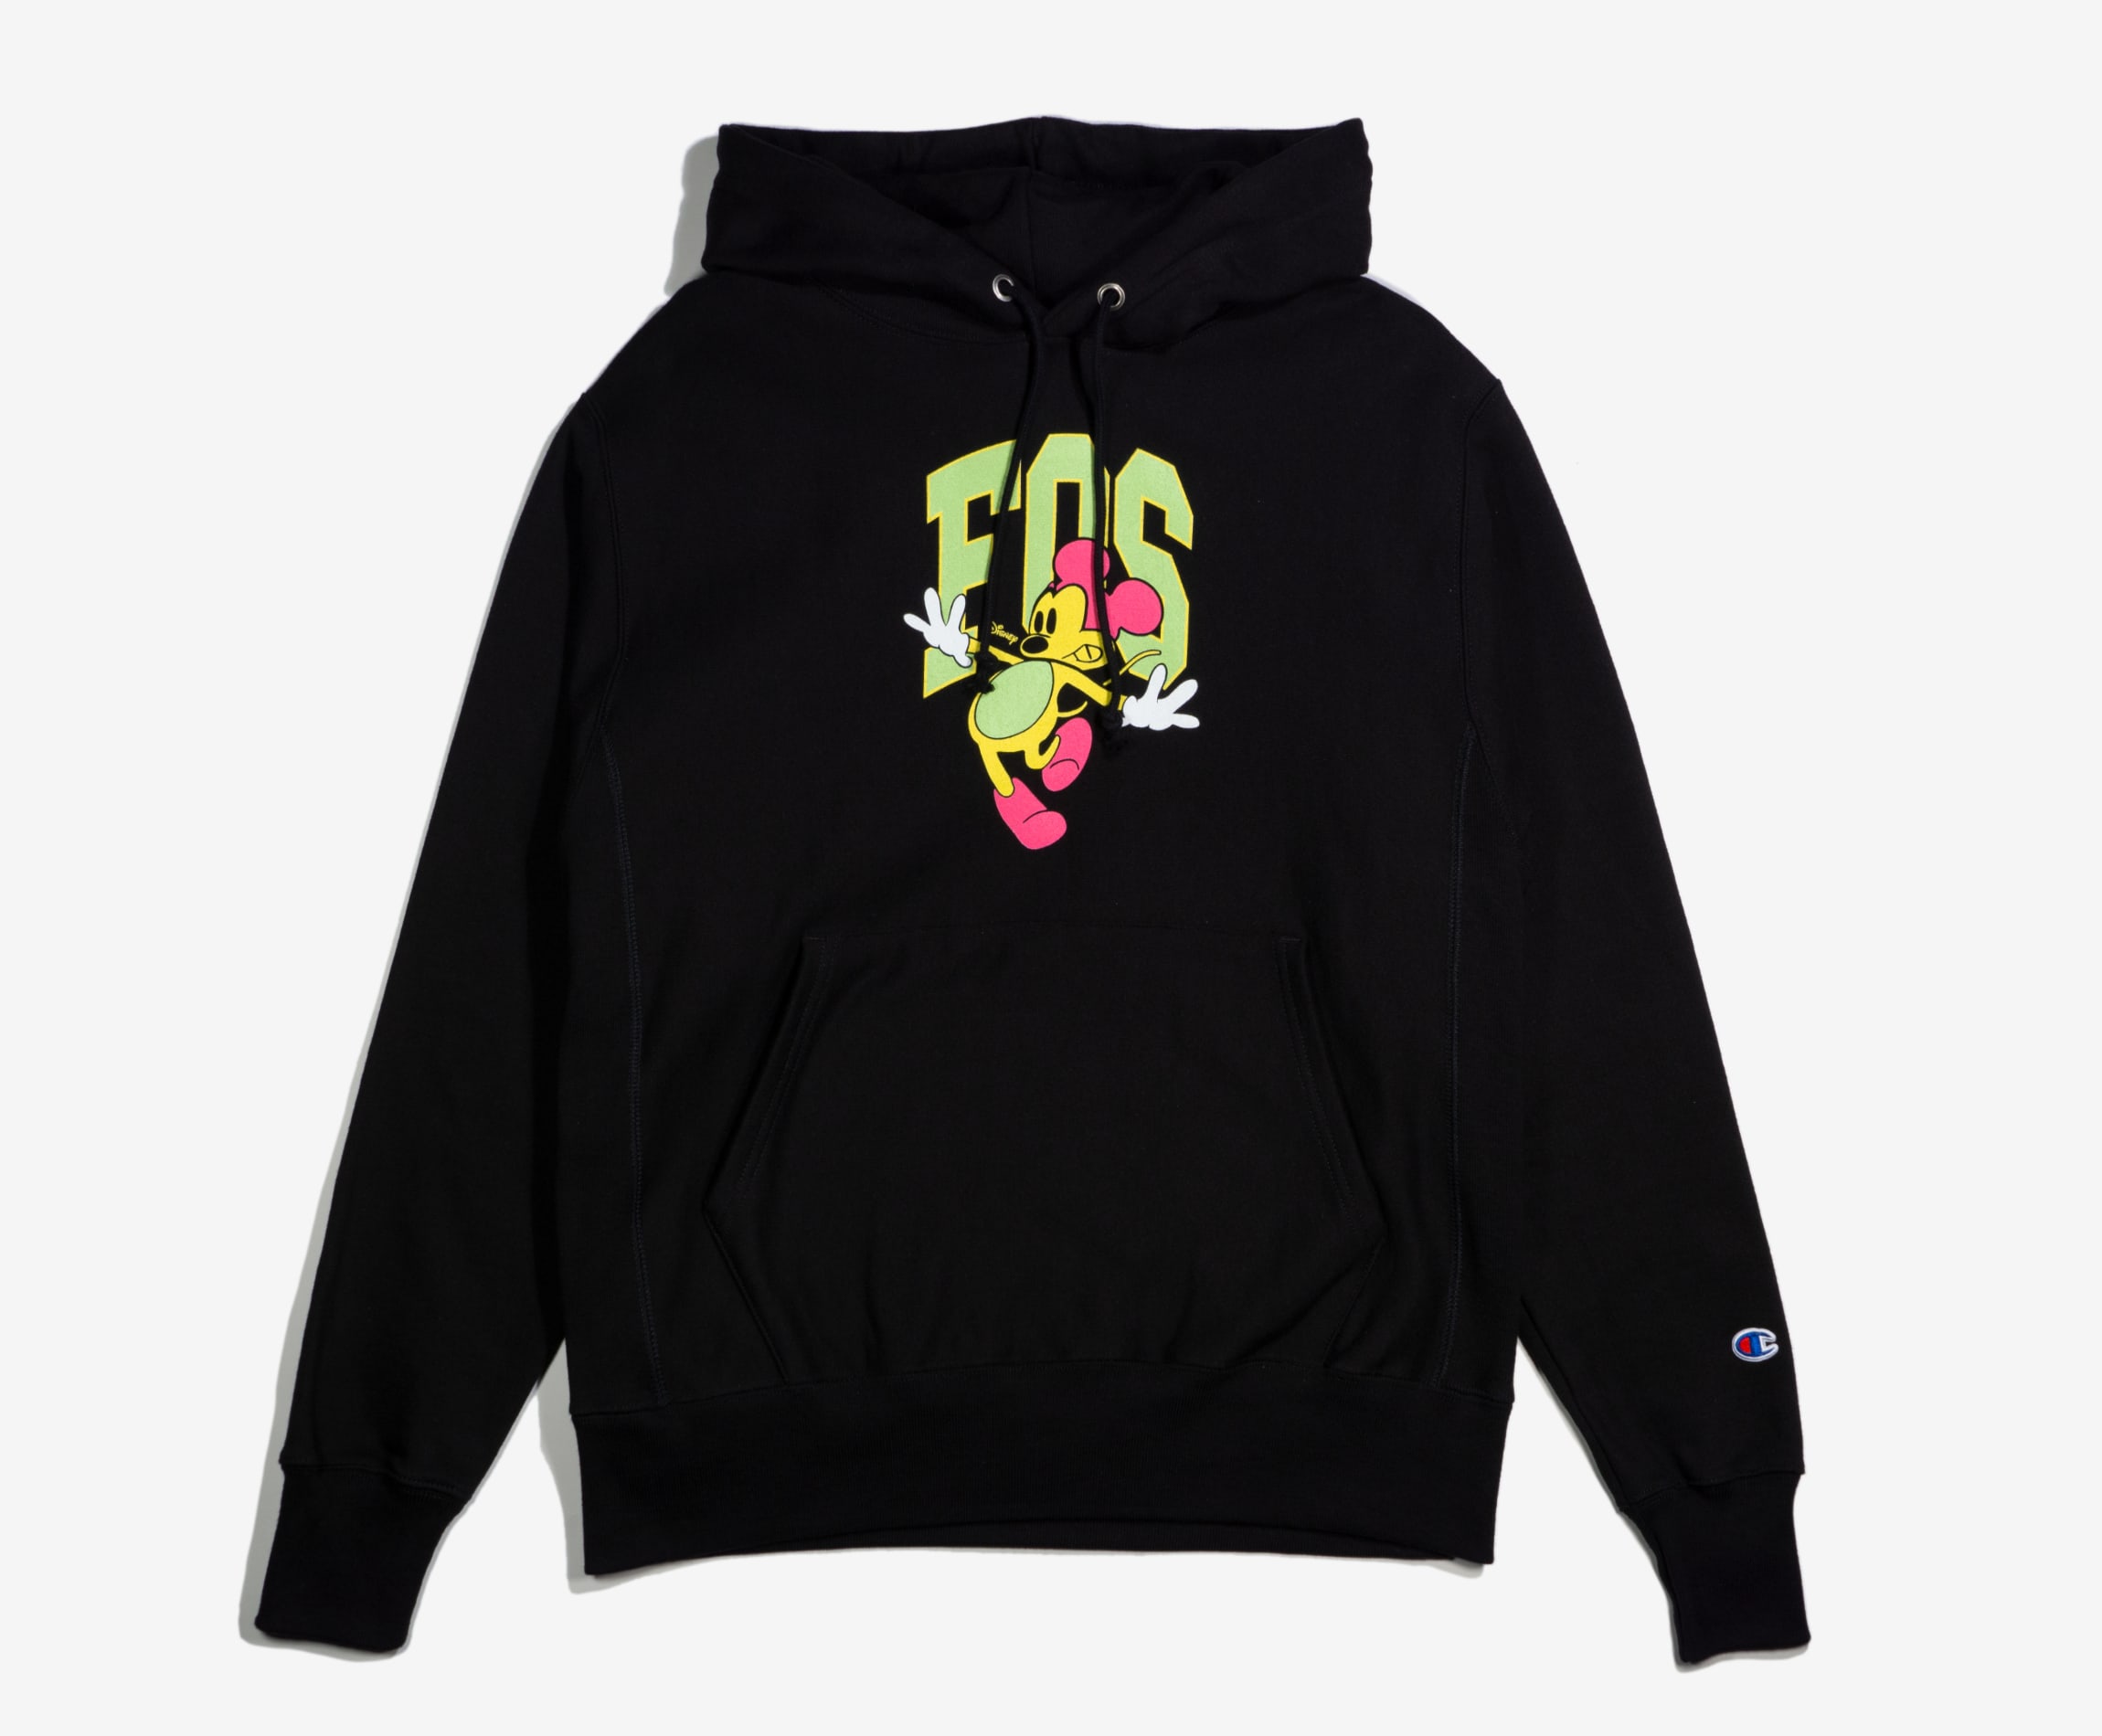 A disney hoodie is pictured